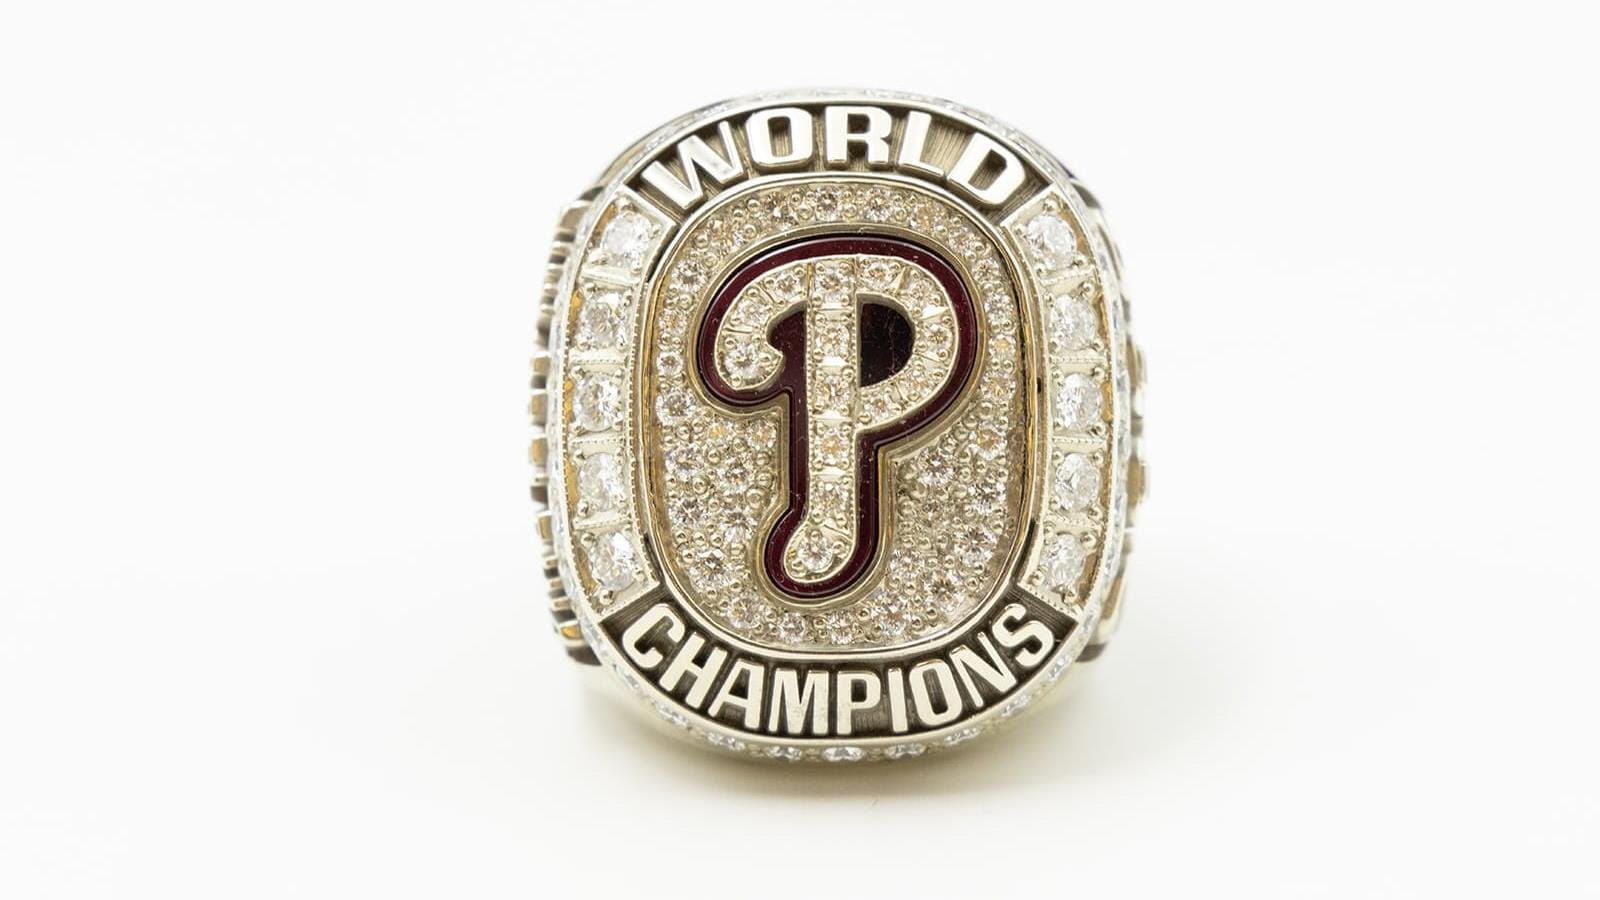 Phillies World Series Championship Ring, 2008 (Atwater Kent Collection at Drexel, Gift of Mayor Michael Nutter, 14.18.1).